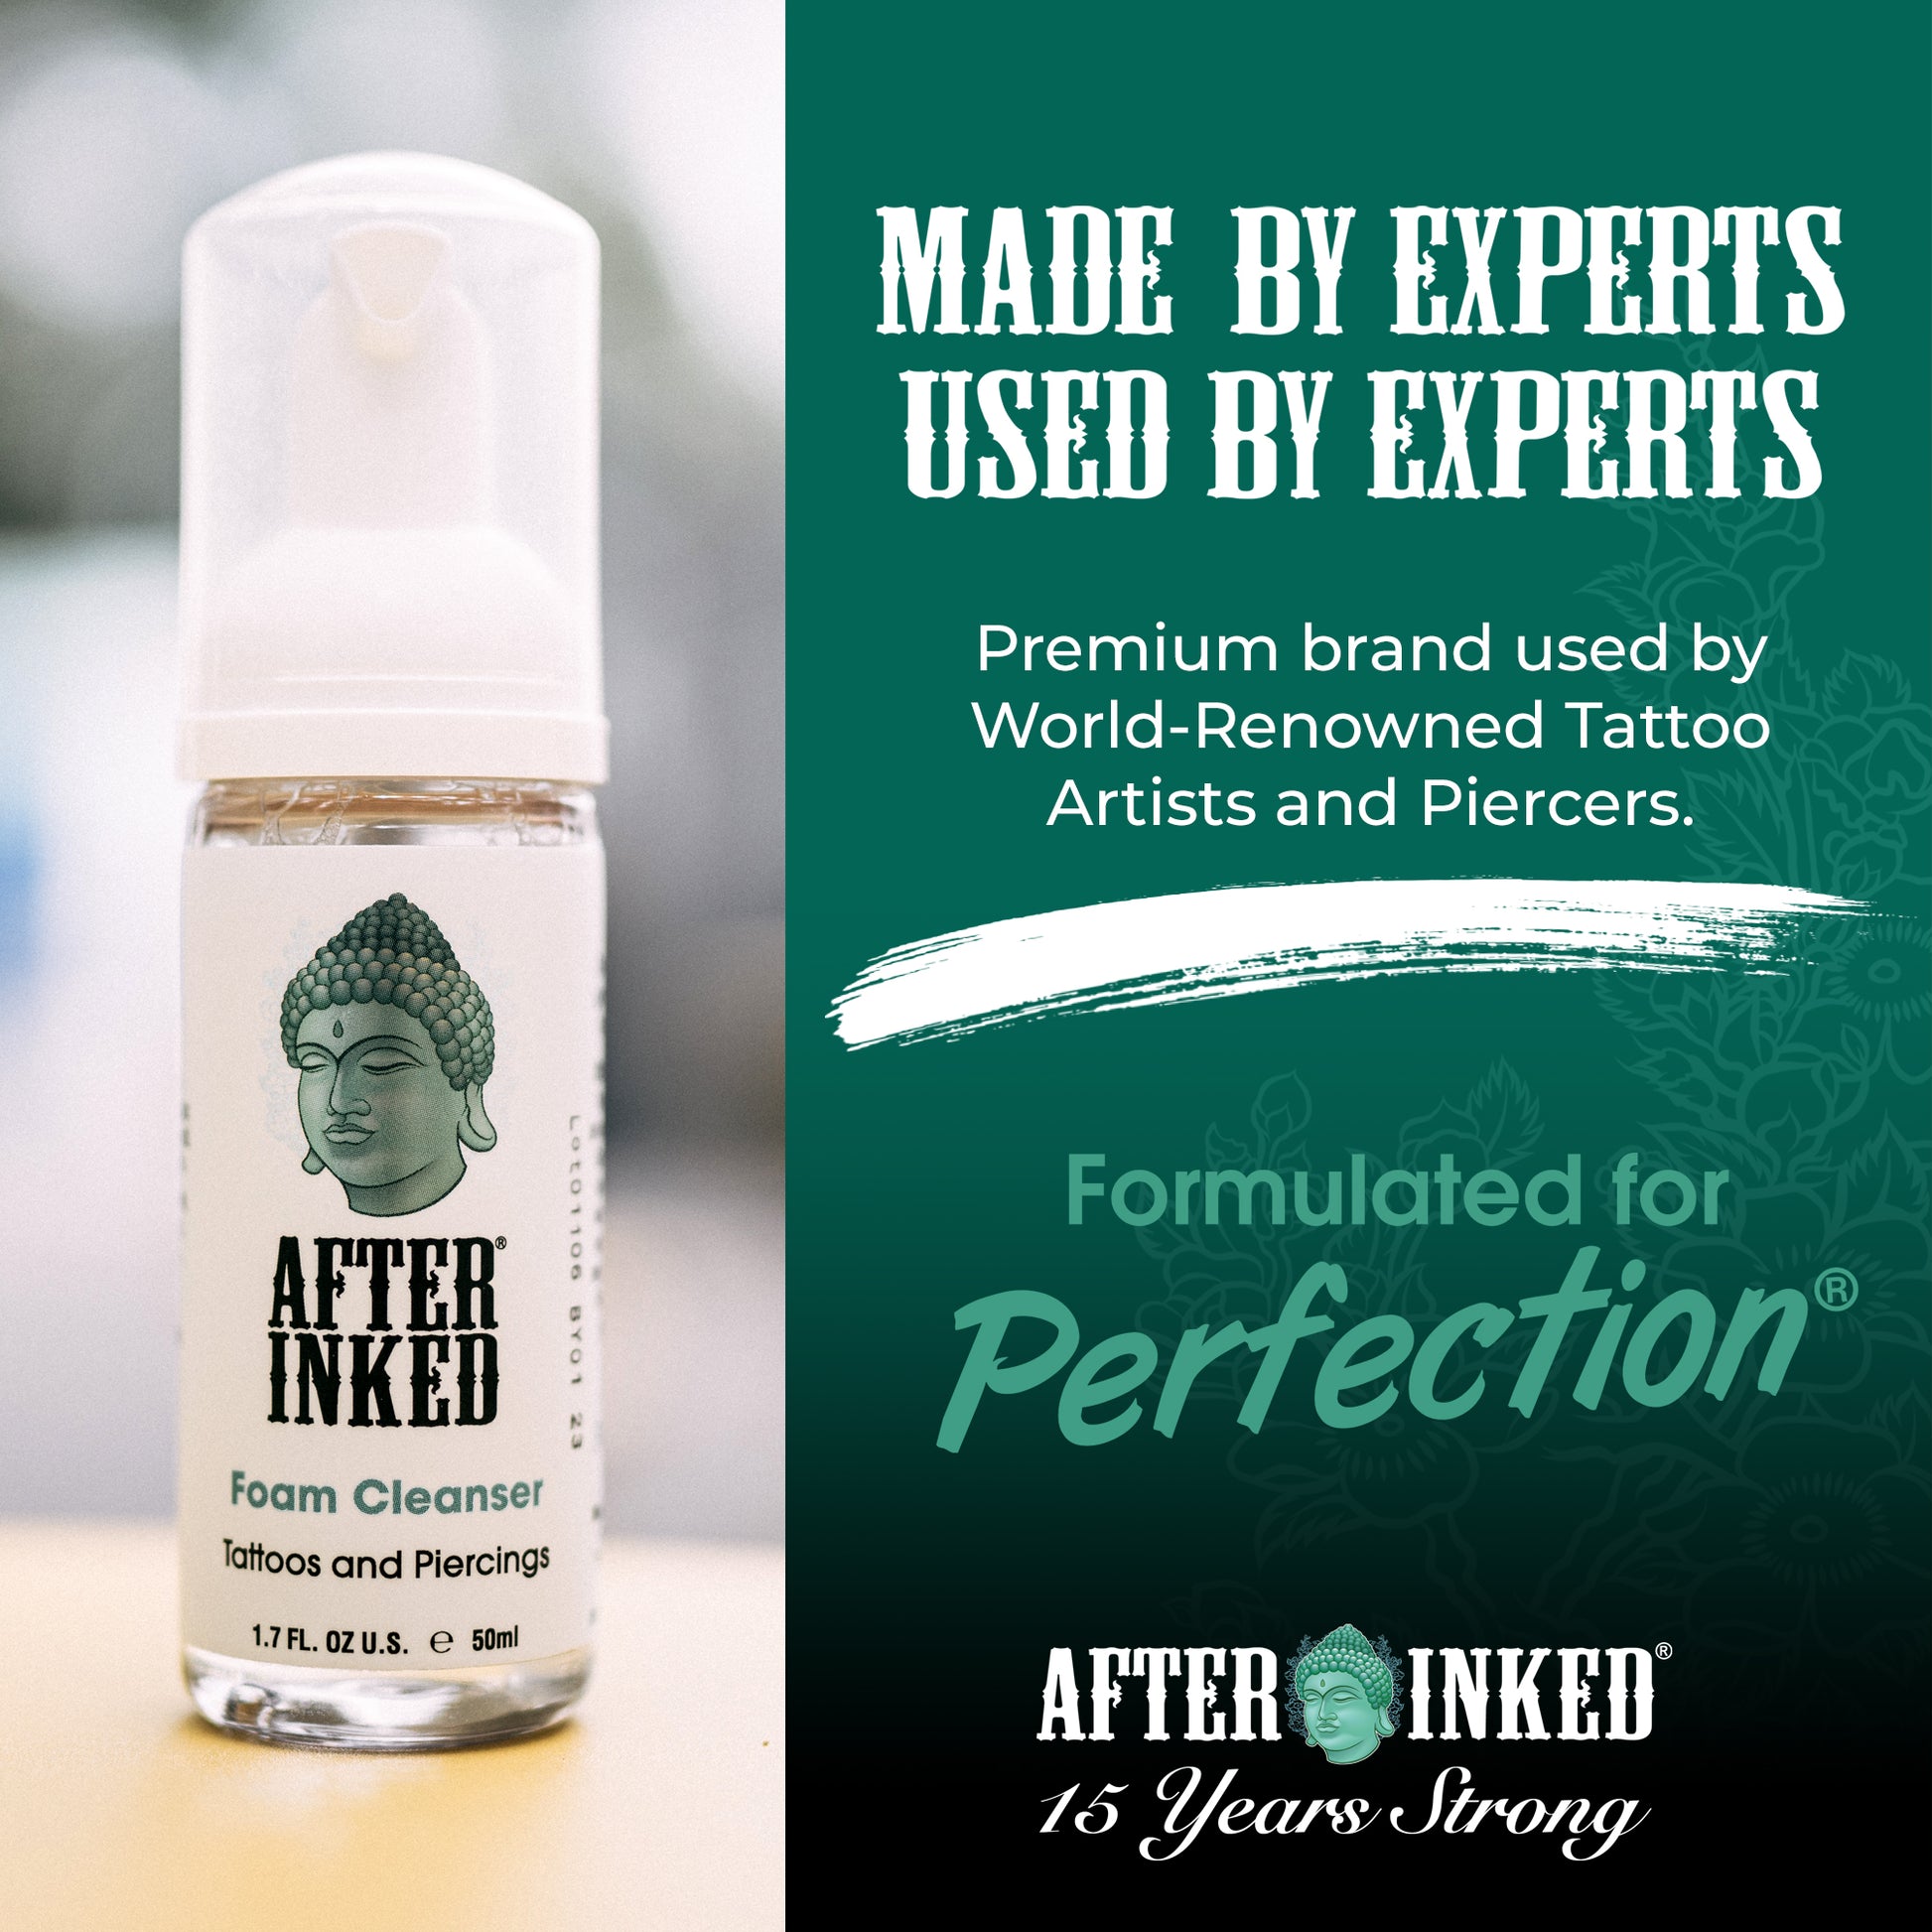 Made by experts, used by experts. Premium brand used by world-renowned tattoo artists and piercers. Formulated for Perfection.